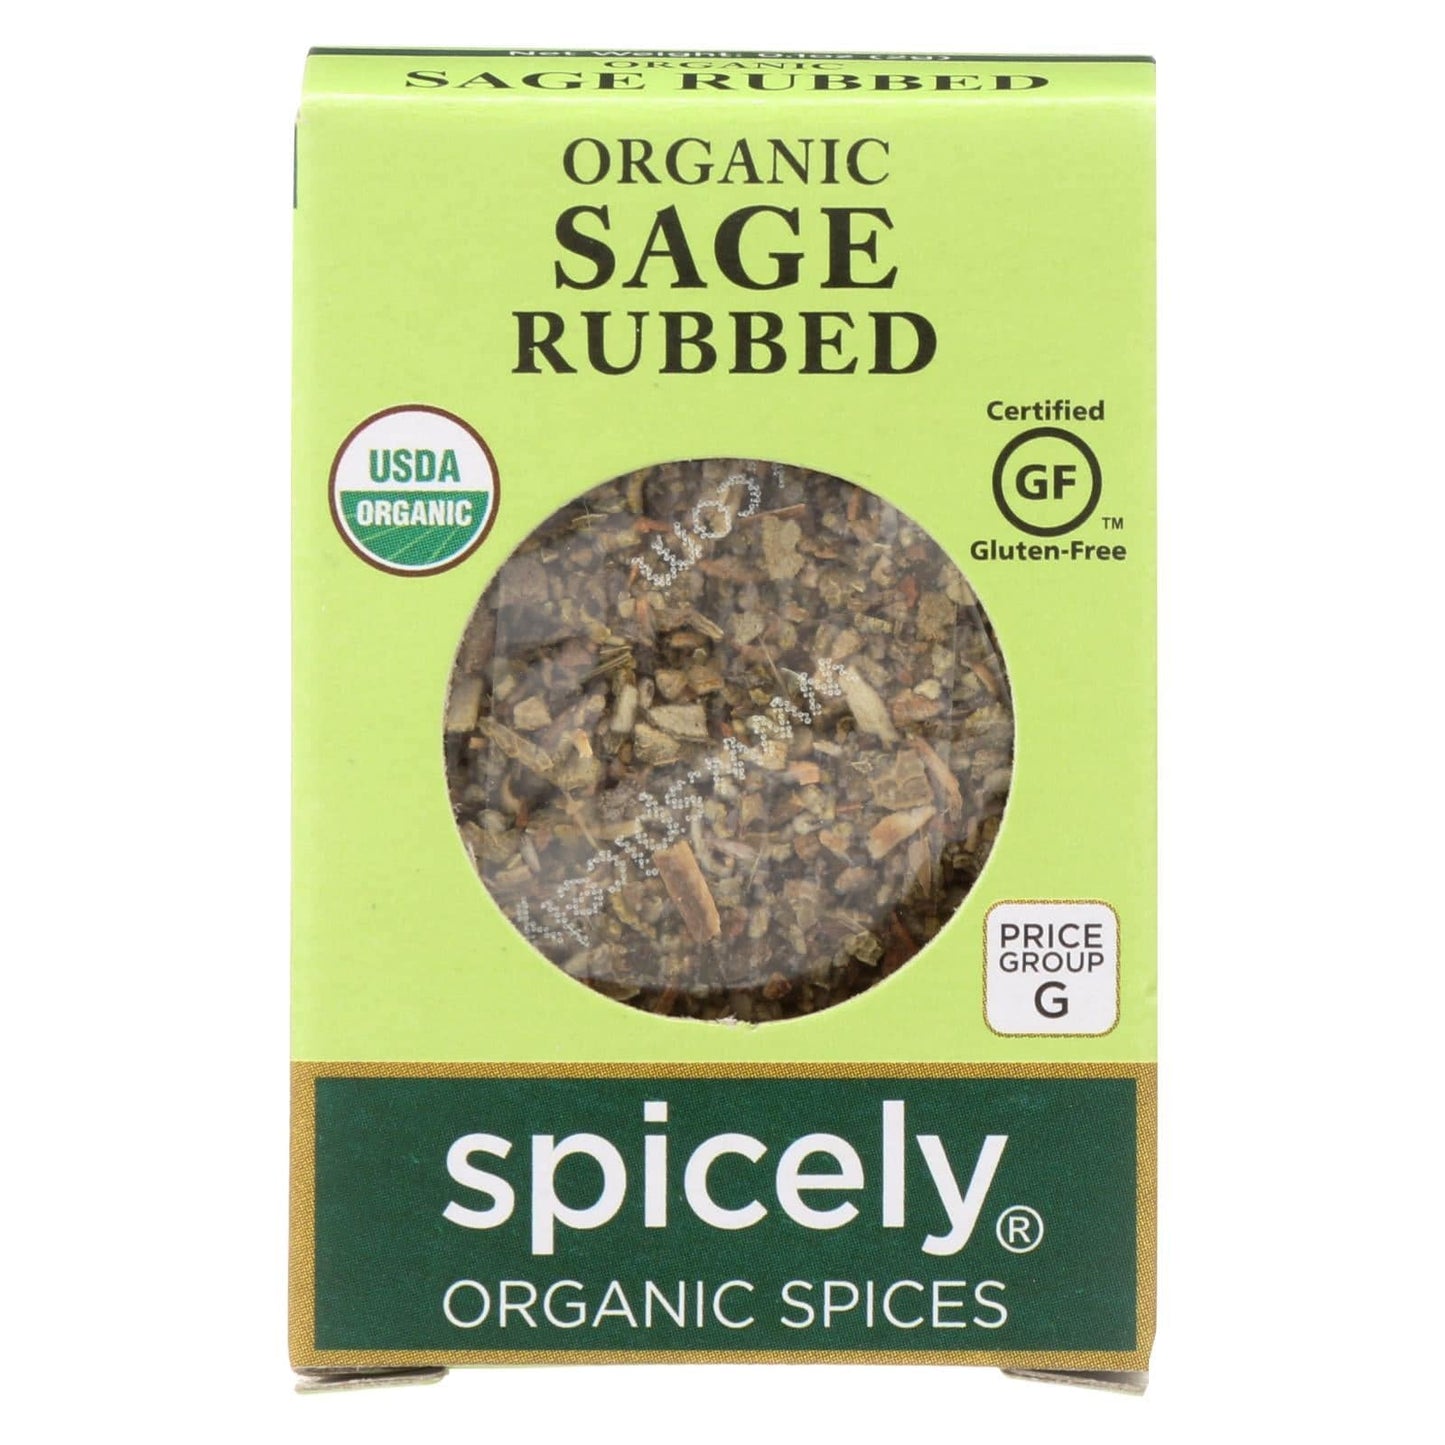 Buy Spicely Organics - Organic Sage - Rubbed - Case Of 6 - 0.1 Oz.  at OnlyNaturals.us